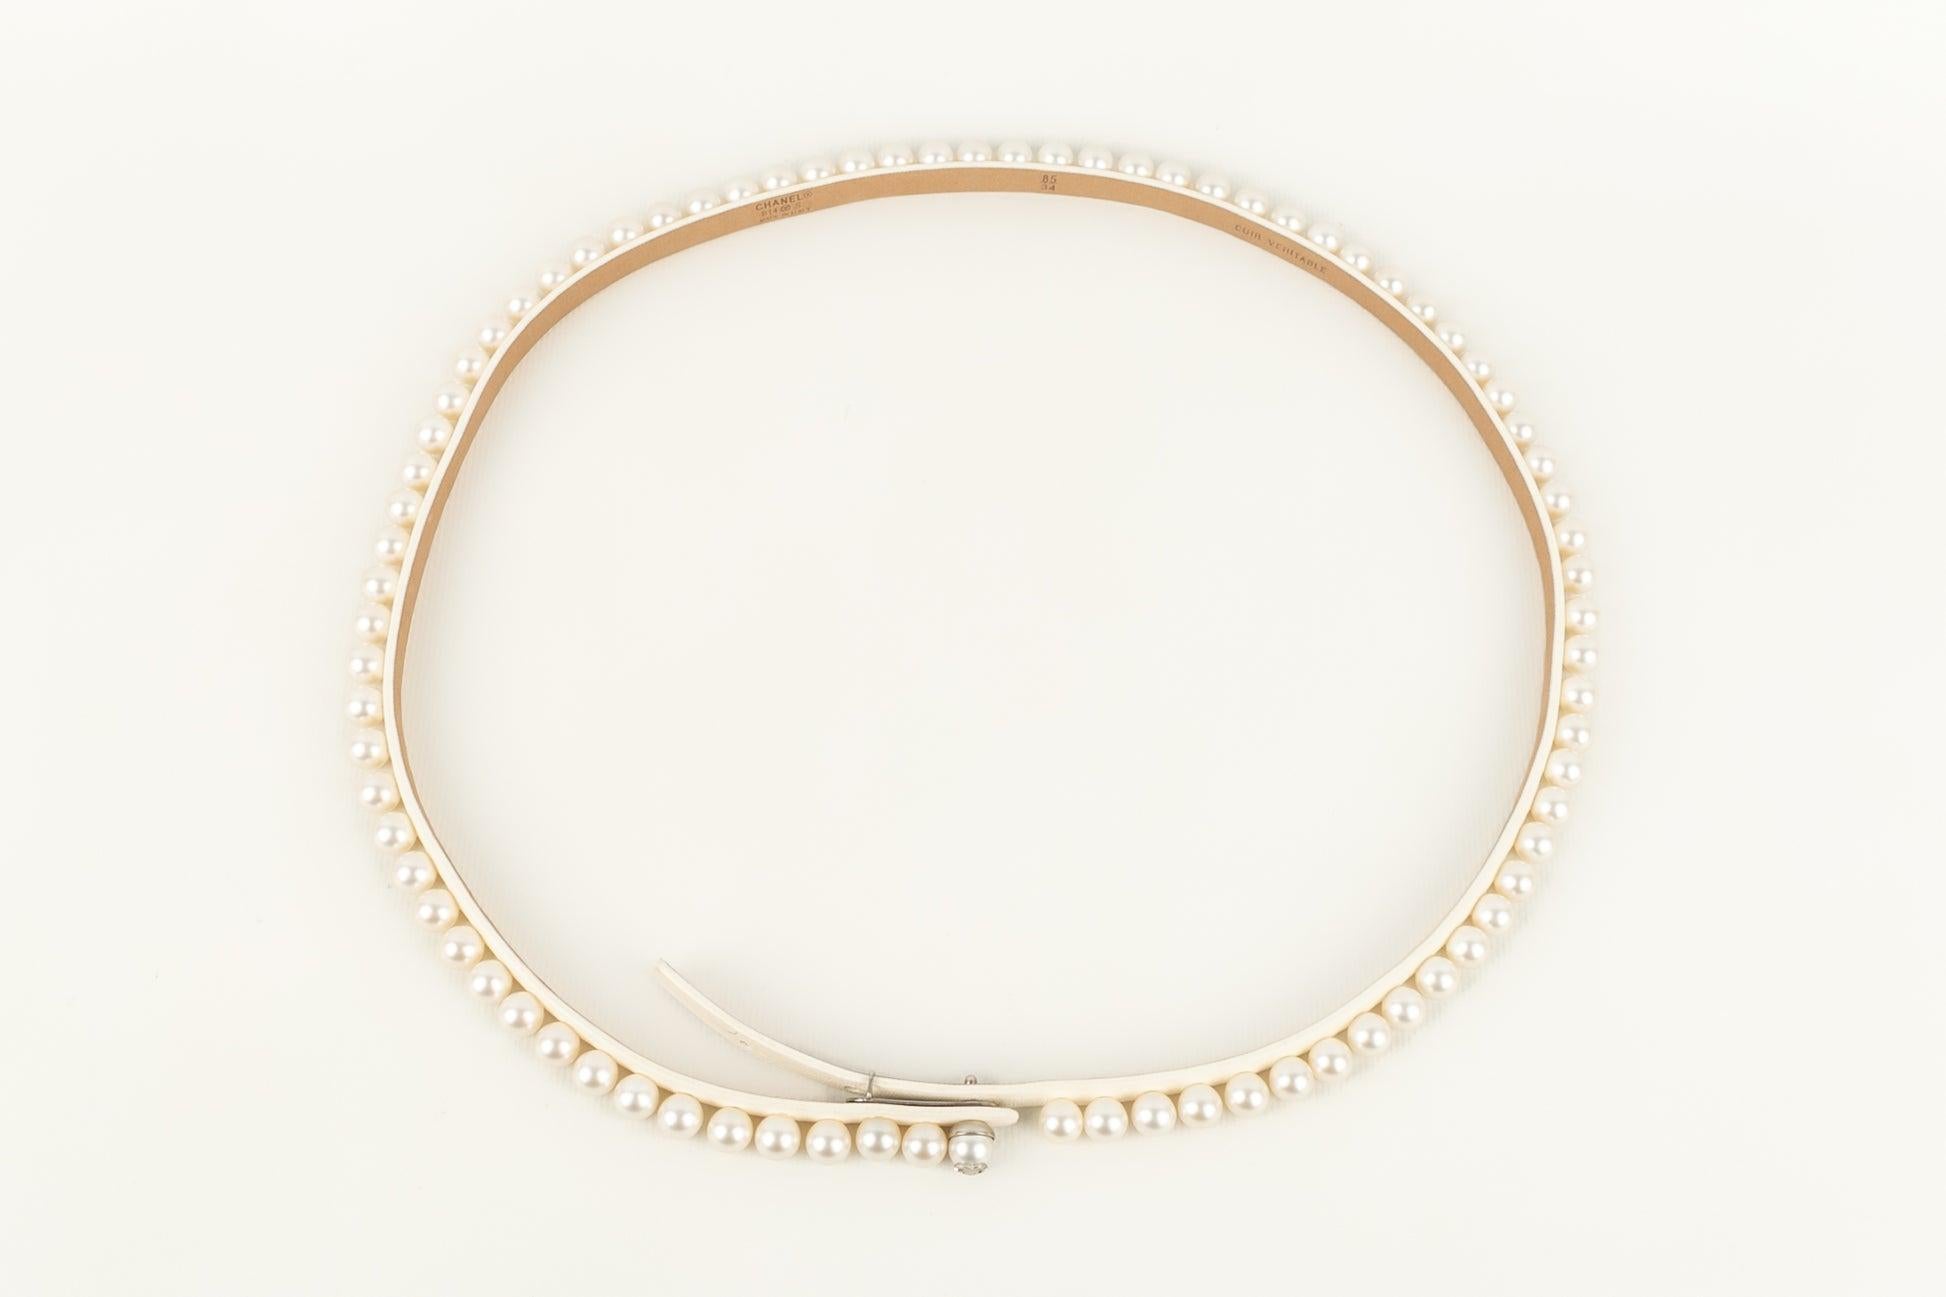 Chanel - (Made in Italy) Belt in leather and costume pearly beads. 2014 Collection. Indicated size 85/34.

Additional information:
Condition: Very good condition
Dimensions: Length: from 82,5 cm to 85 cm
Period: 21st Century

Seller Reference: CCB27